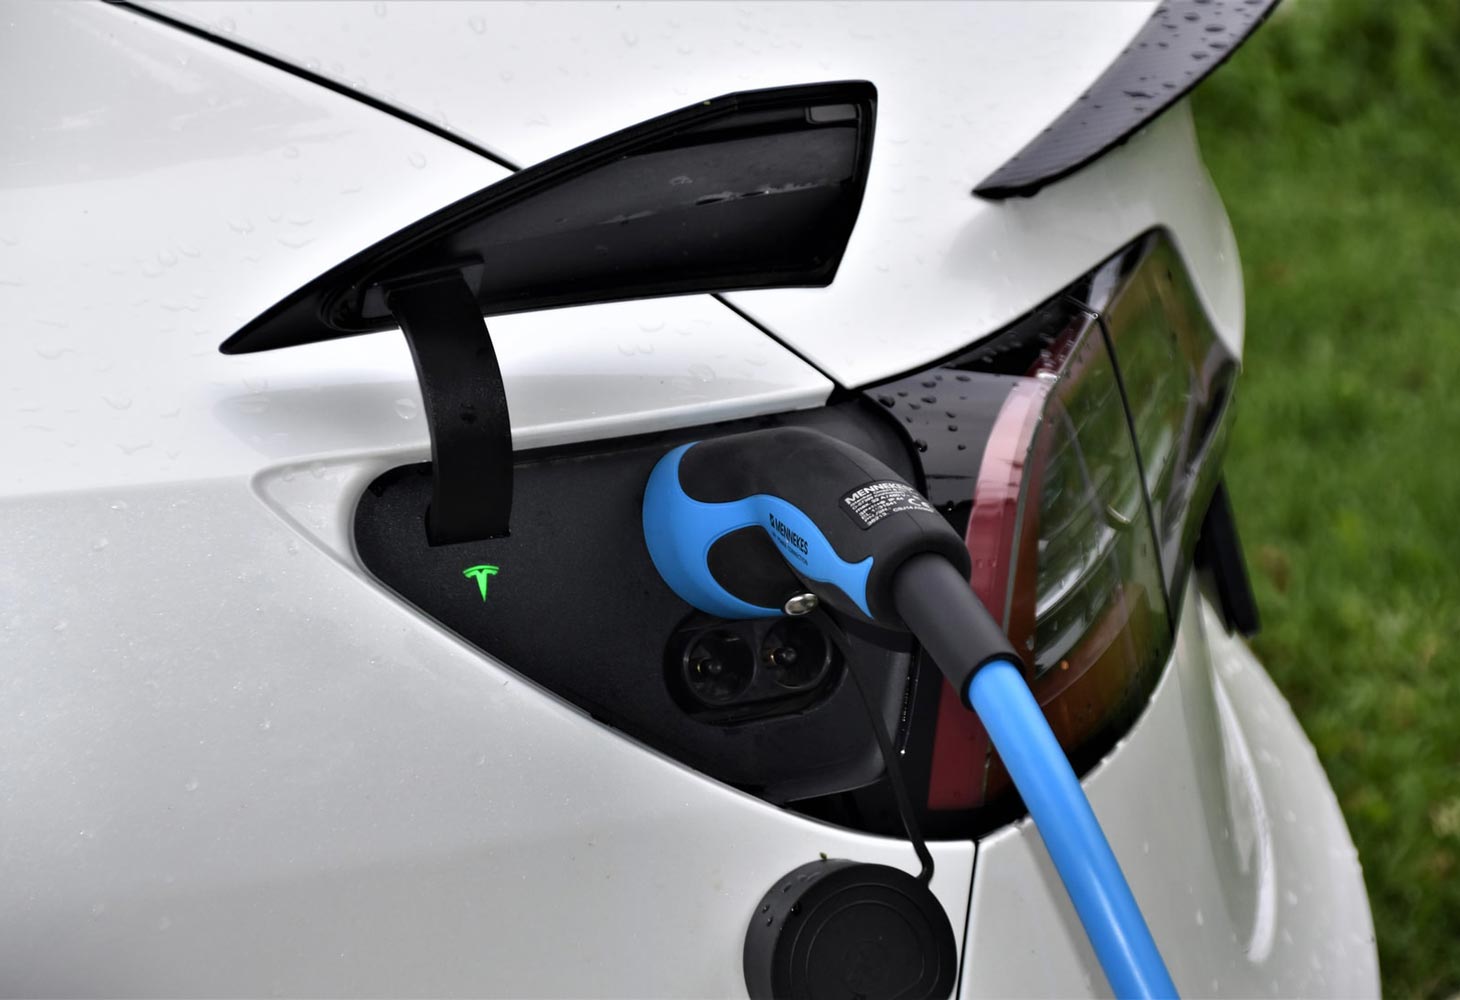 Electric vehicles: Special requirements and impact on future grease demand